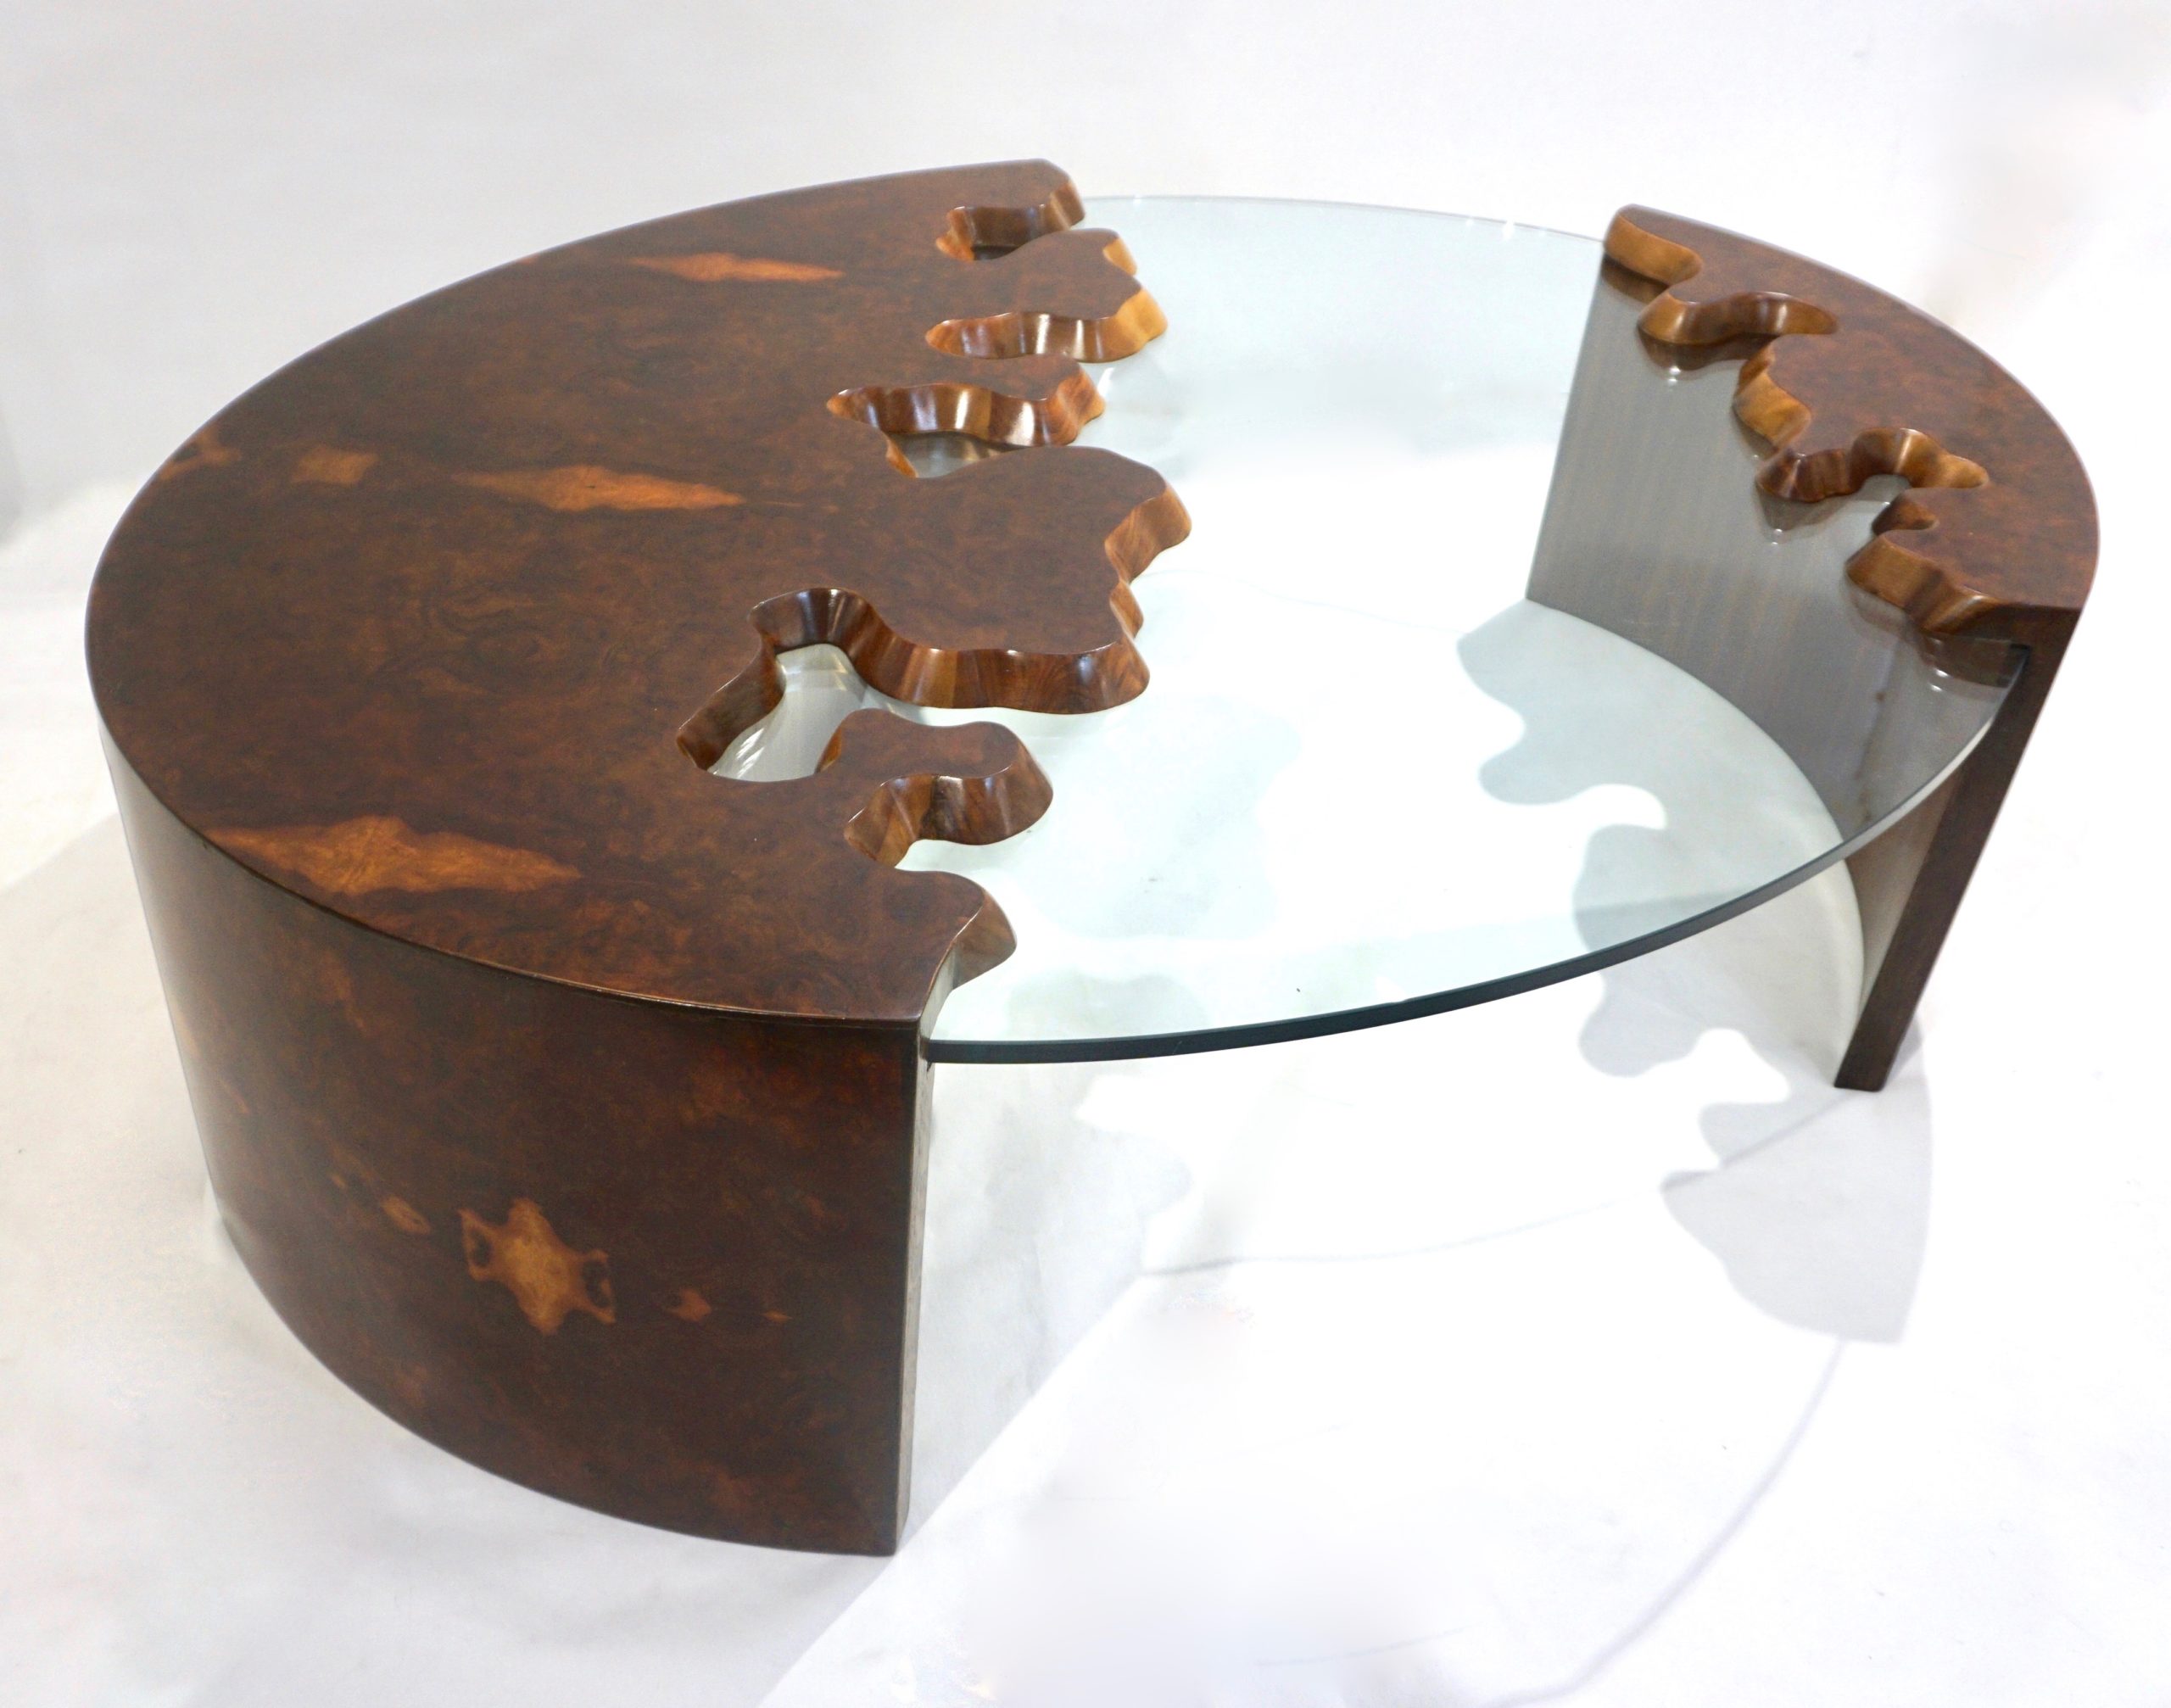 cosulich_interiors_and_antiques_products_new_york_design_Bespoke_1980_Italian_Organic_Walnut_Veneer_Glass_Oval_Coffee_Table_top_side-scaled-1